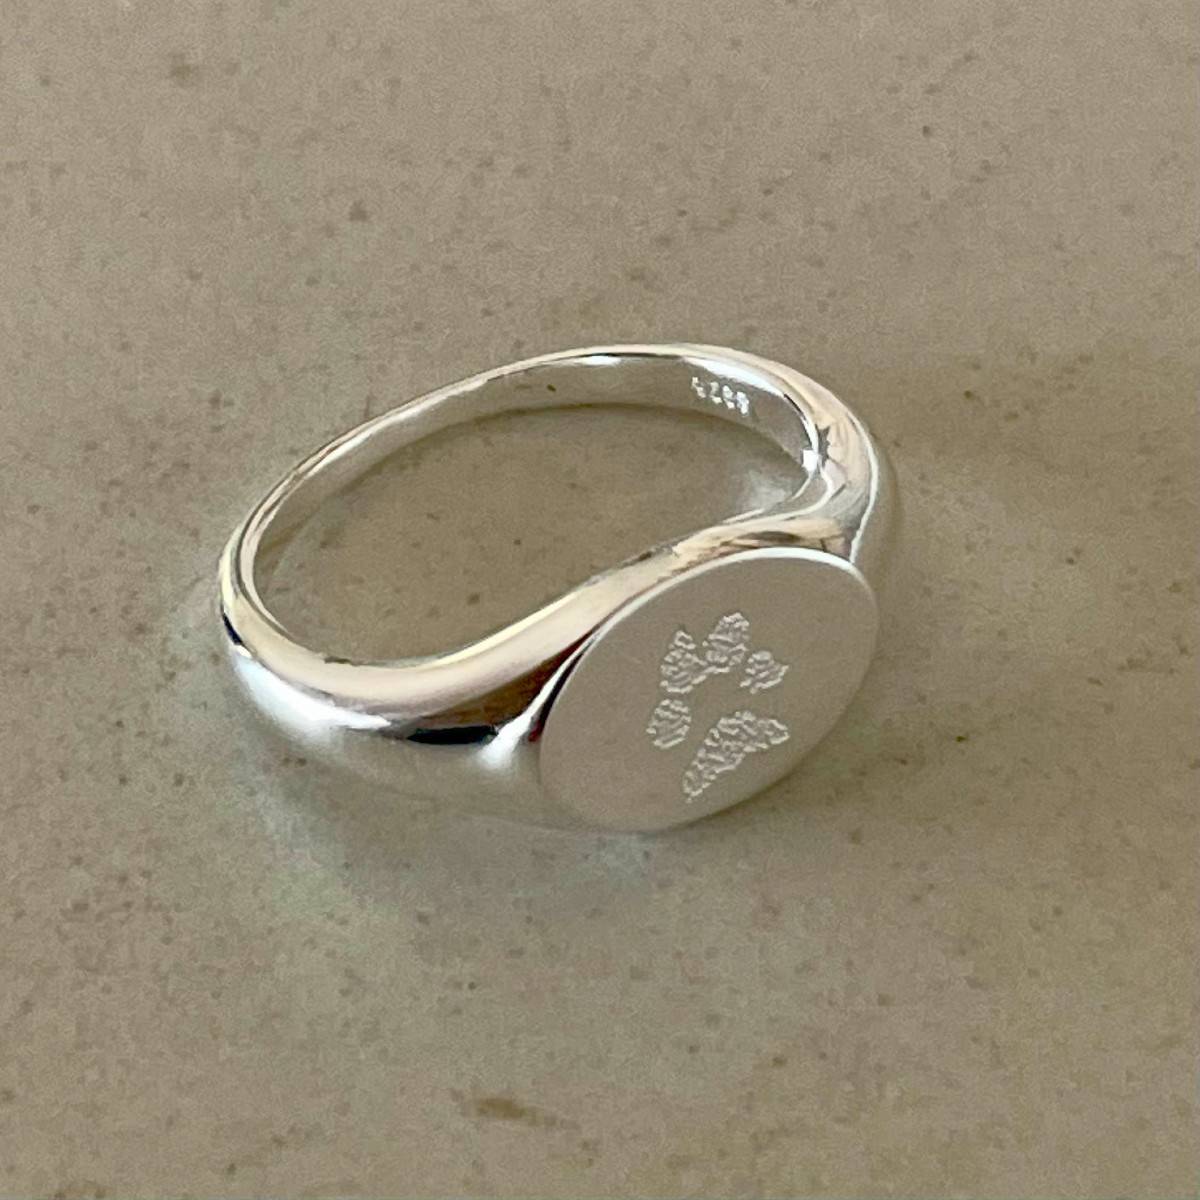 signet ring with paw print engraved